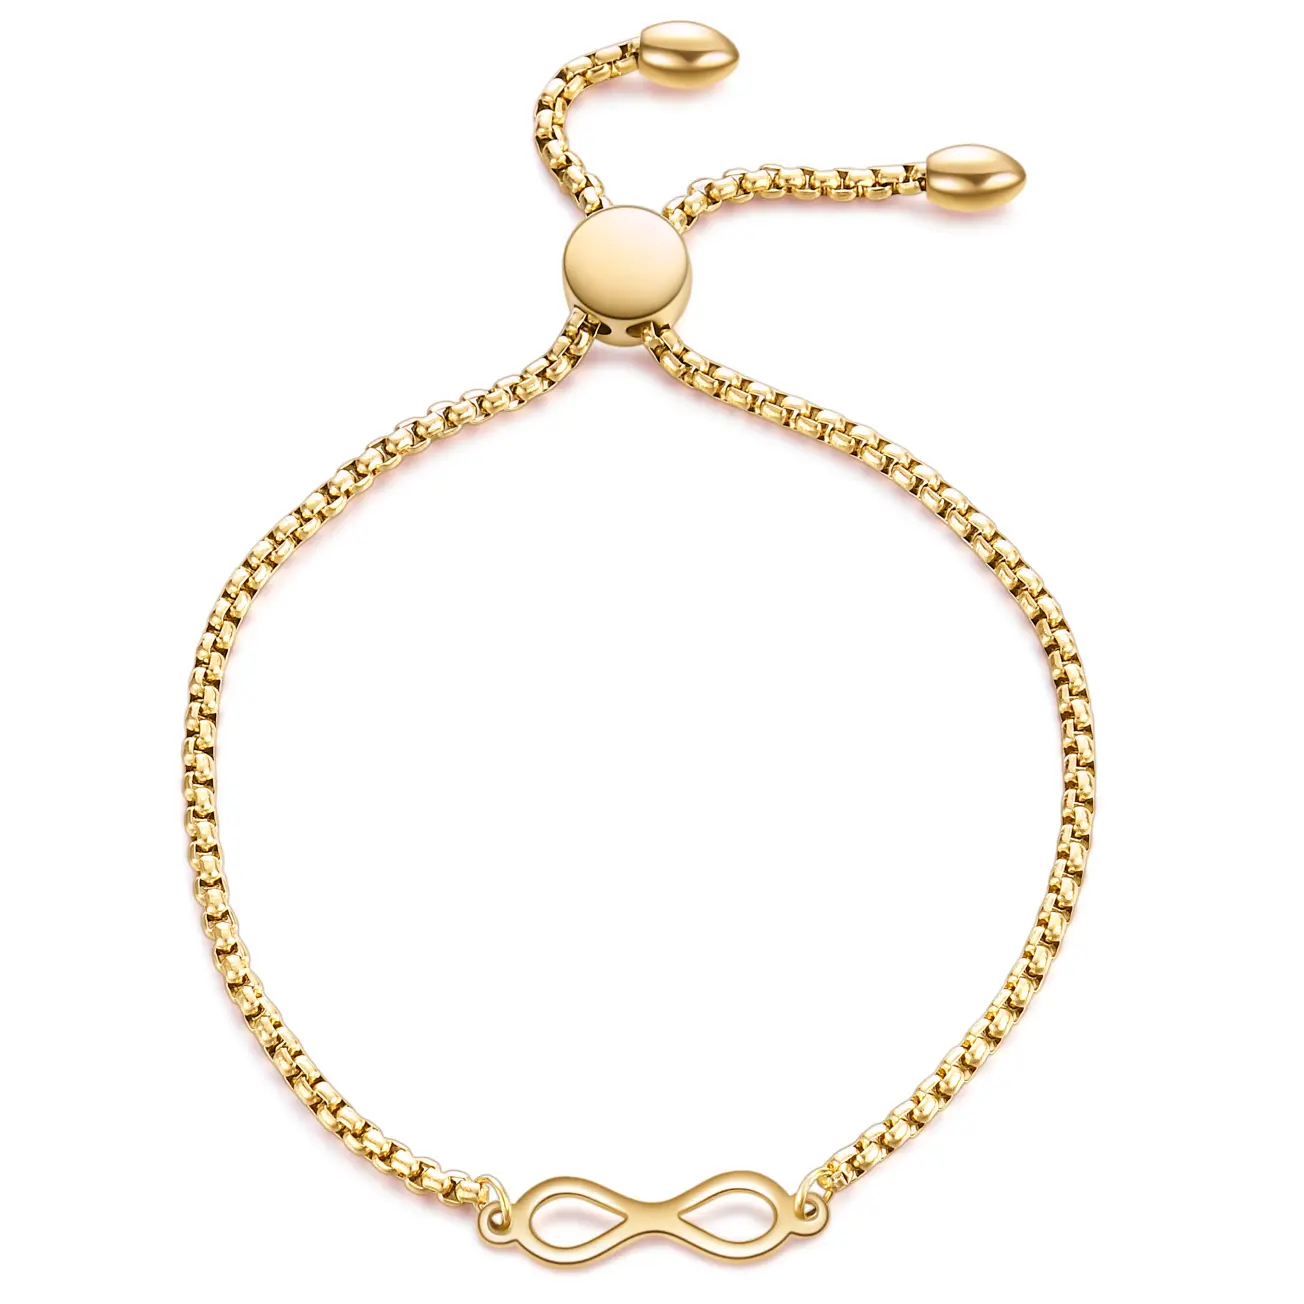 Yitenong Real 18K Gold Plated Lucky Number 8 Adjustable Infinity Charm Slider Extender Chain Adjustable Bracelet